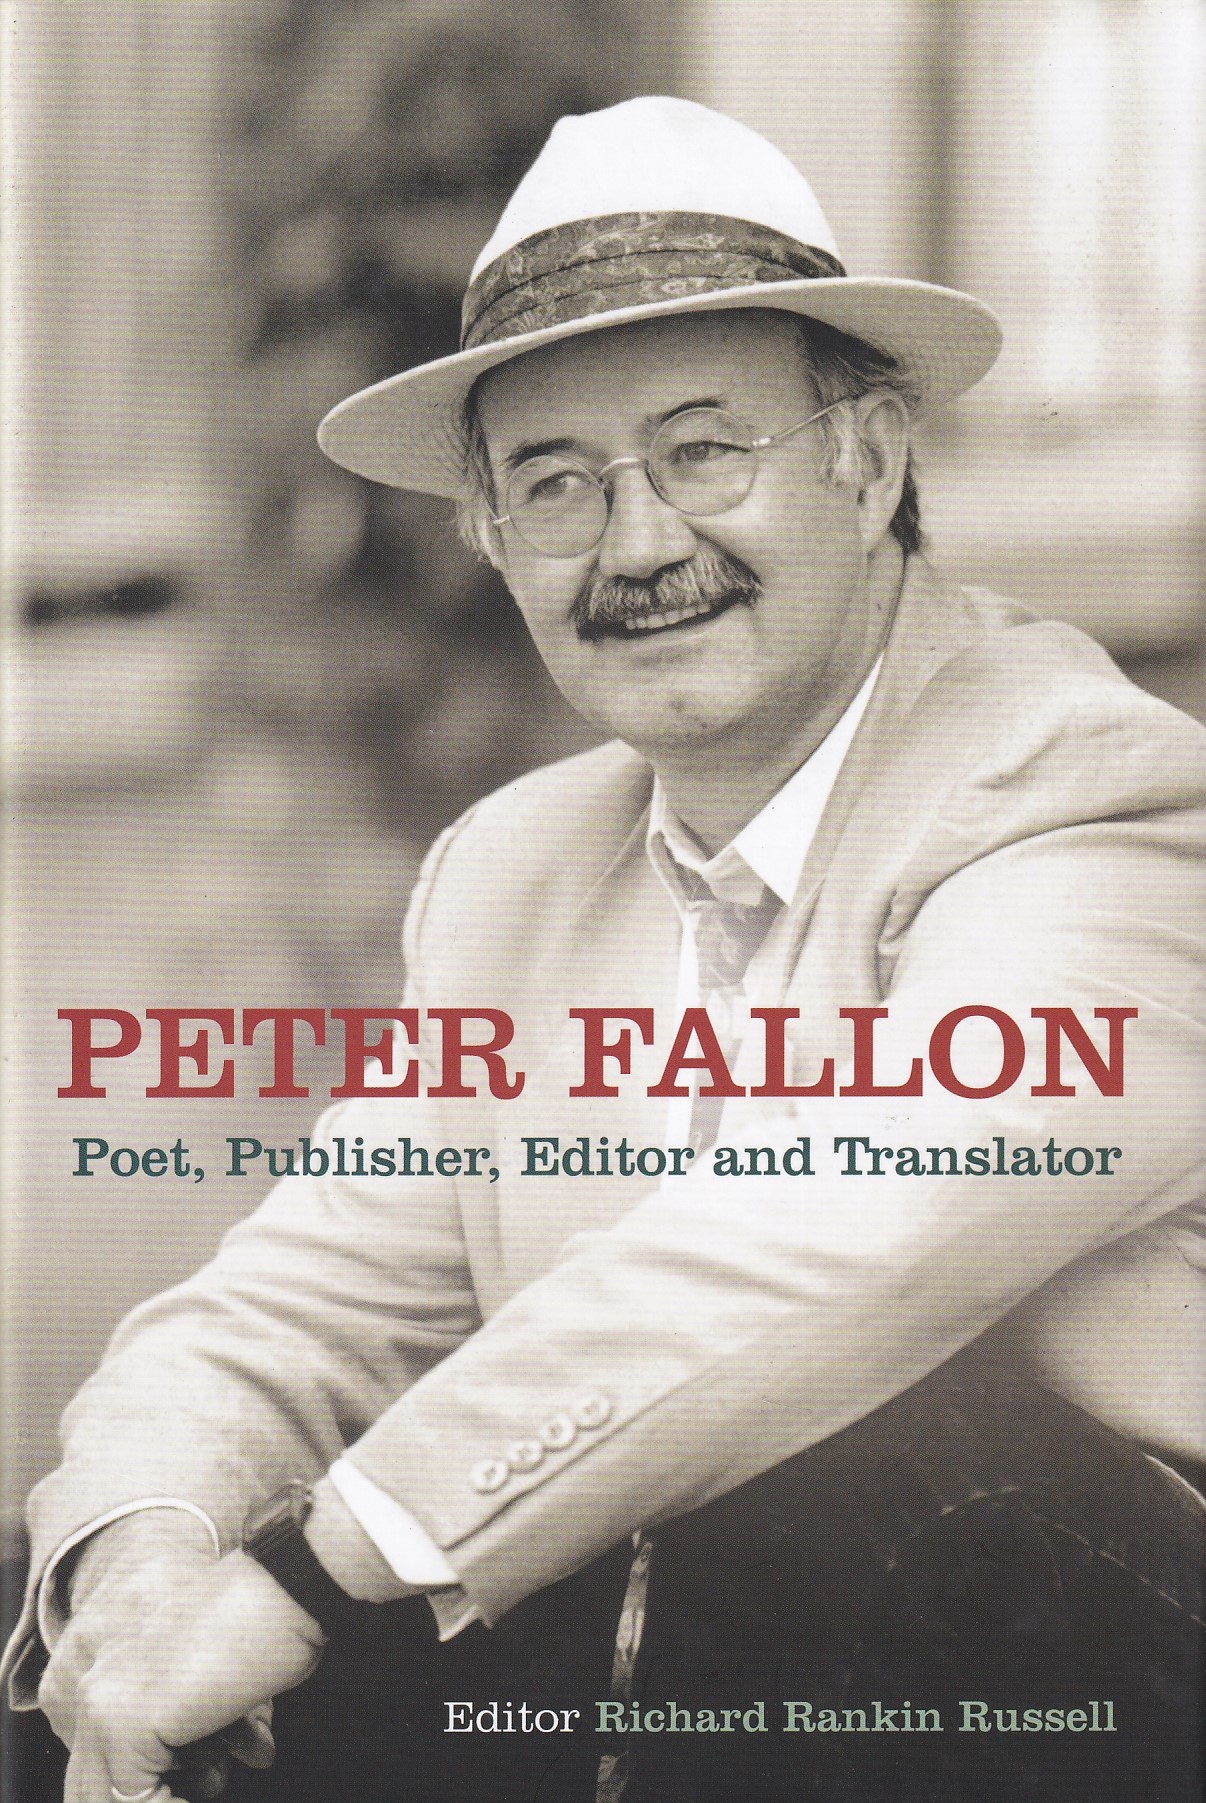 Peter Fallon: Poet, Publisher, Editor and Translator by Russell, Richard Rankin